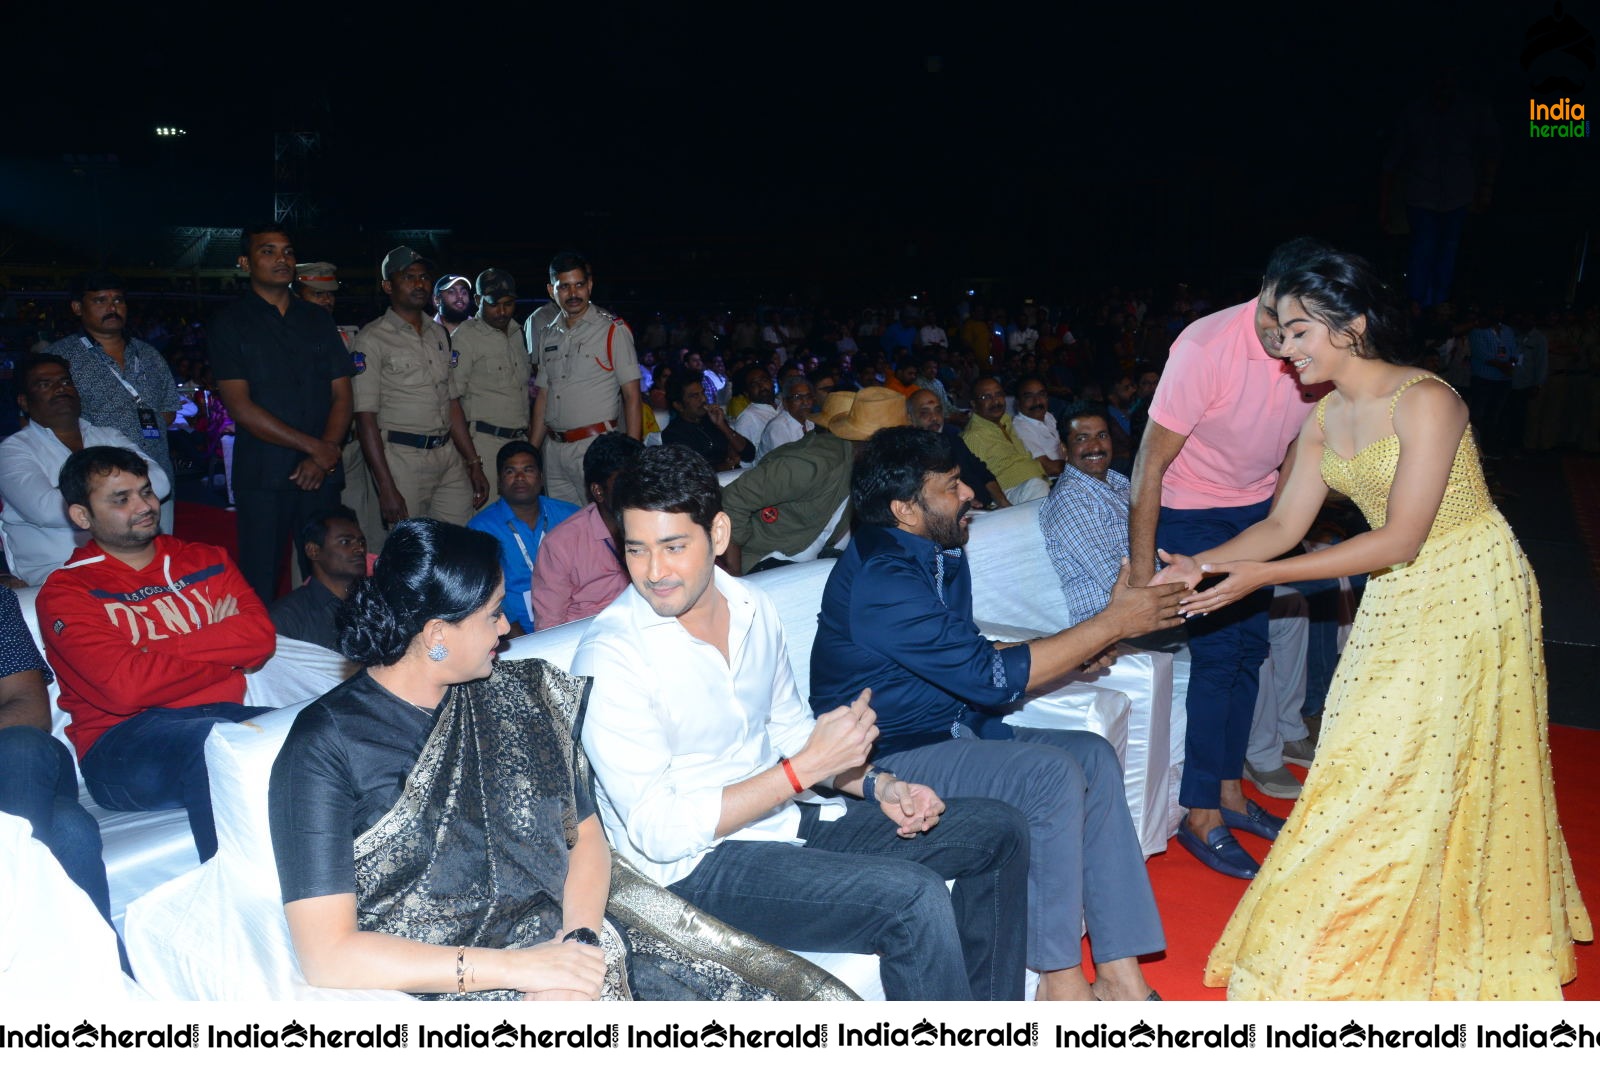 Some More Candid moments from Sarileru Neekevvaru event Set 3